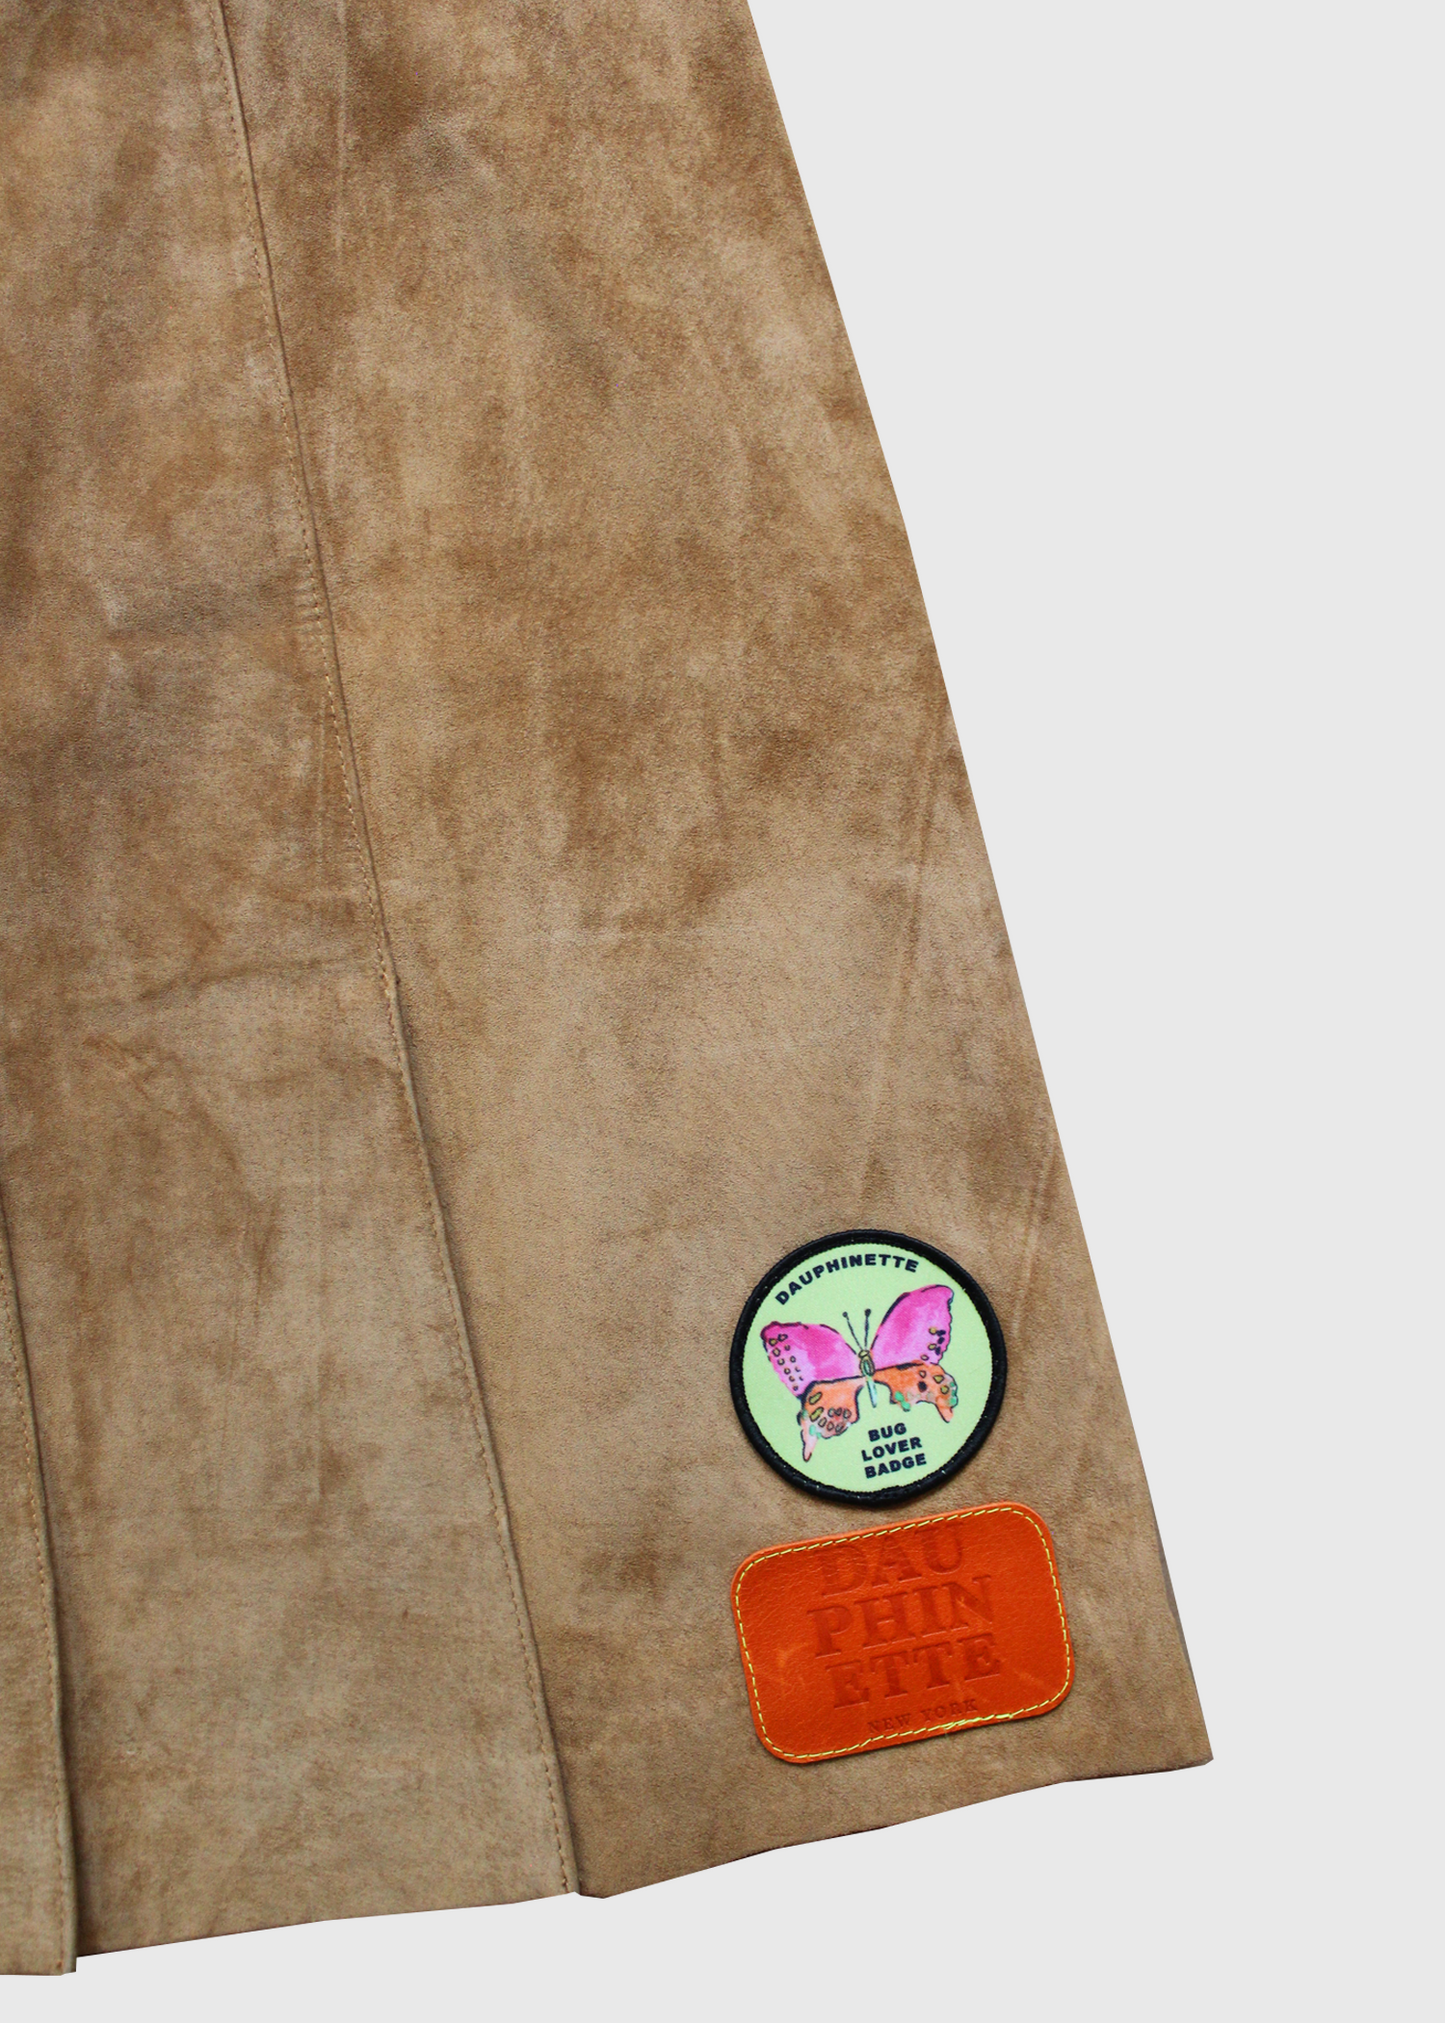 Camel suede pleated mini skirt with signature Dauphinette text and Dauphinette pink and green butterfly patches.